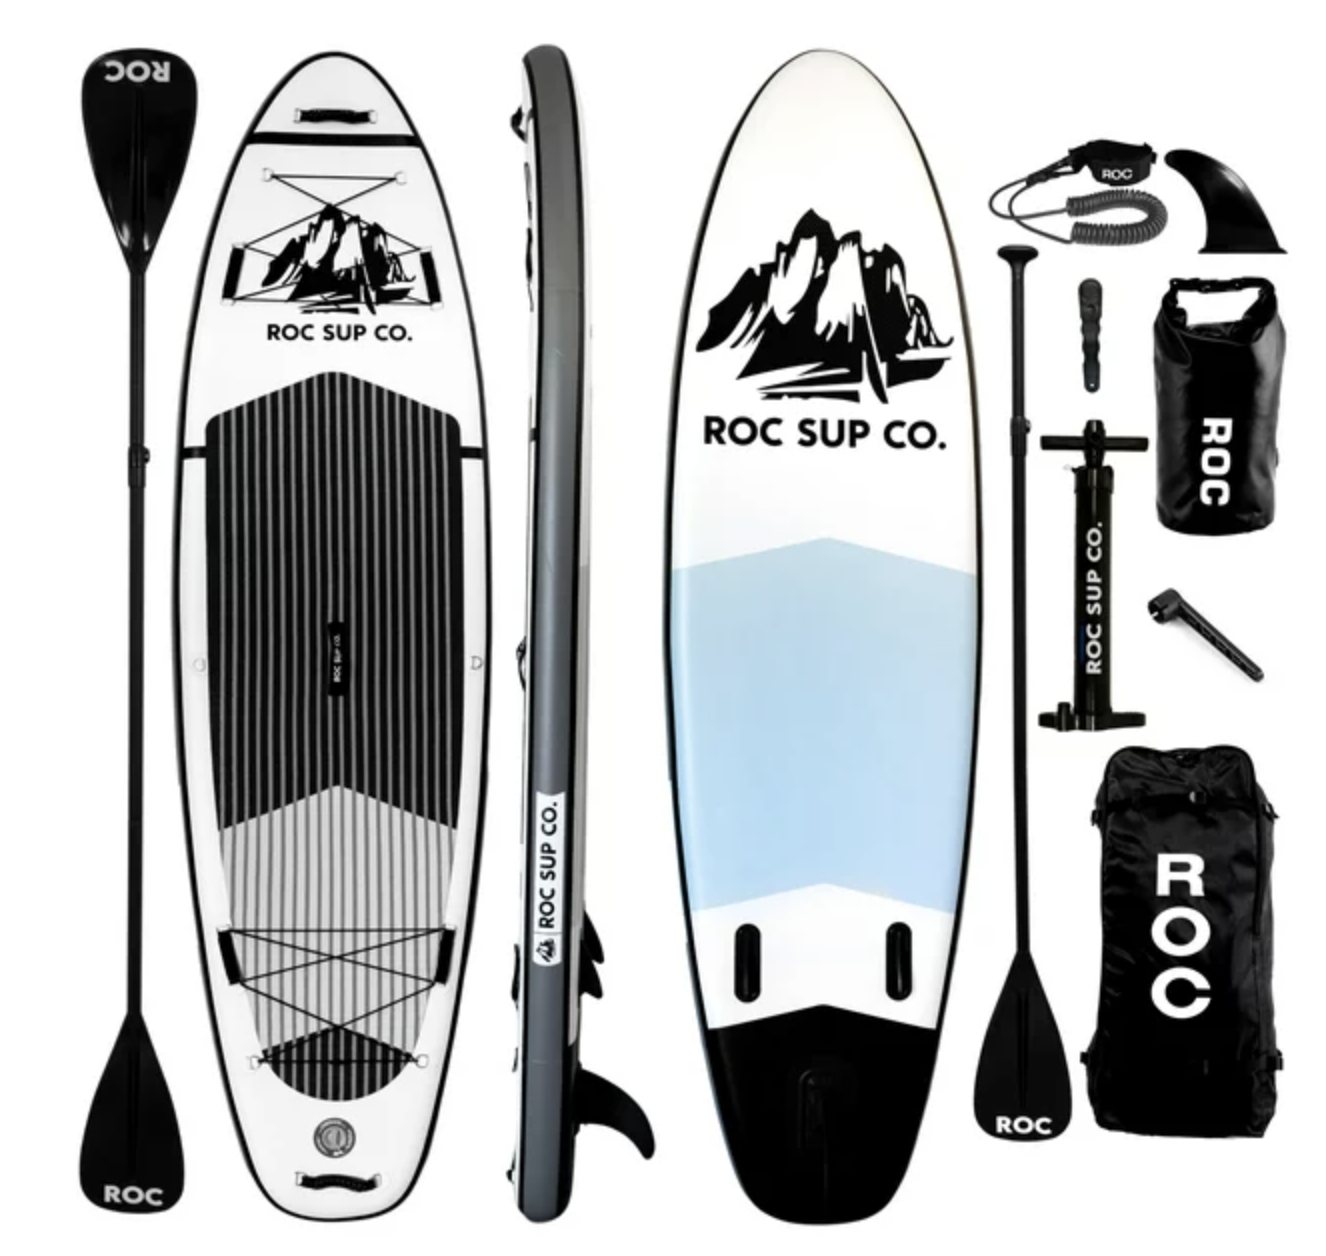 HOT* Roc Inflatable Stand Up Paddle Board + Accessories Bundle for